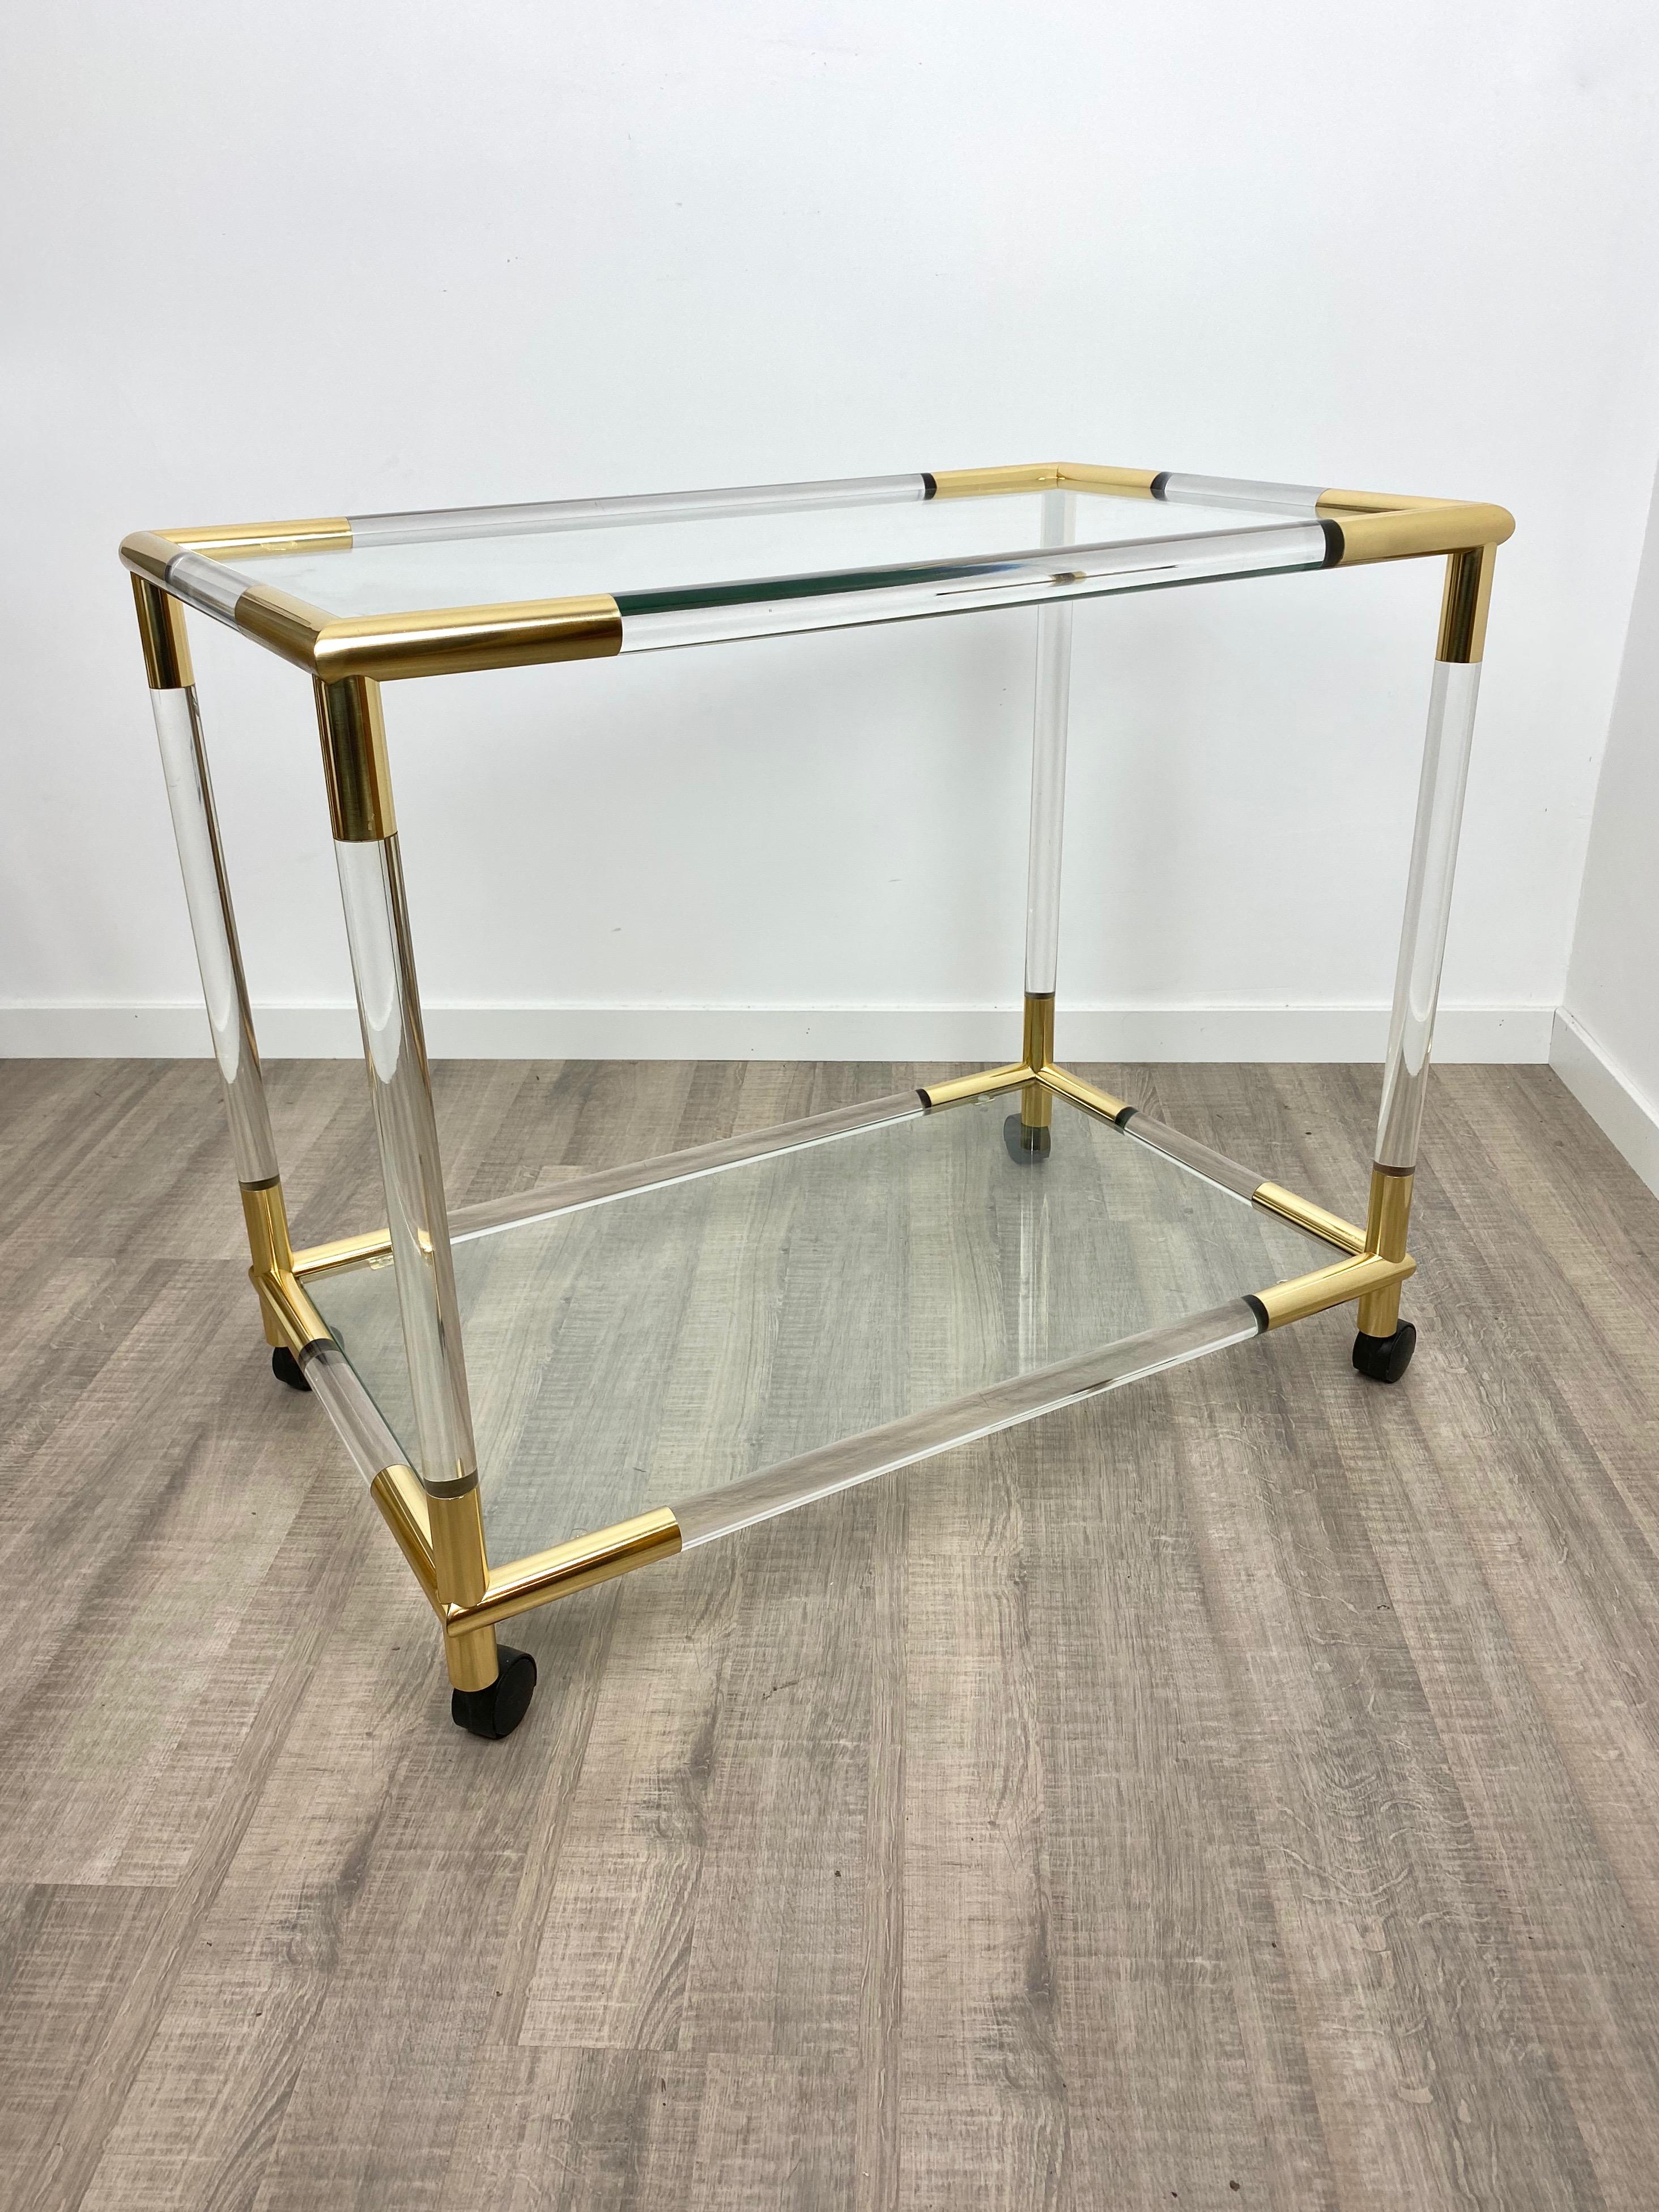 Italian Lucite, Brass and Glass Bar Serving Cart Trolley, Italy, 1970s For Sale